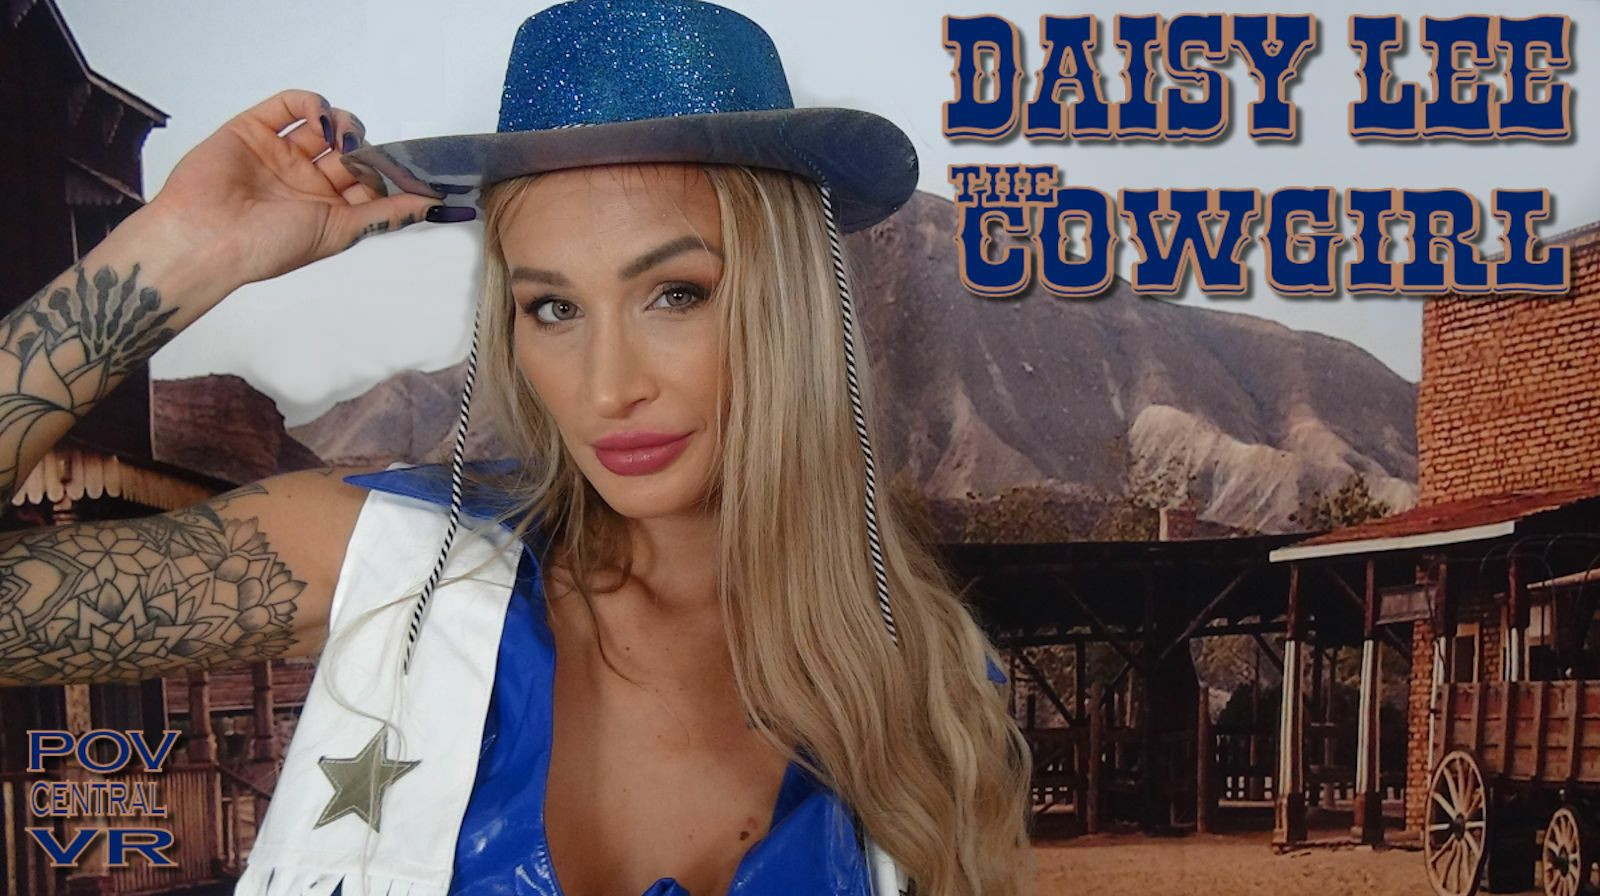 Daisy Lee: The Cowgirl: Daisy Lee Slideshow